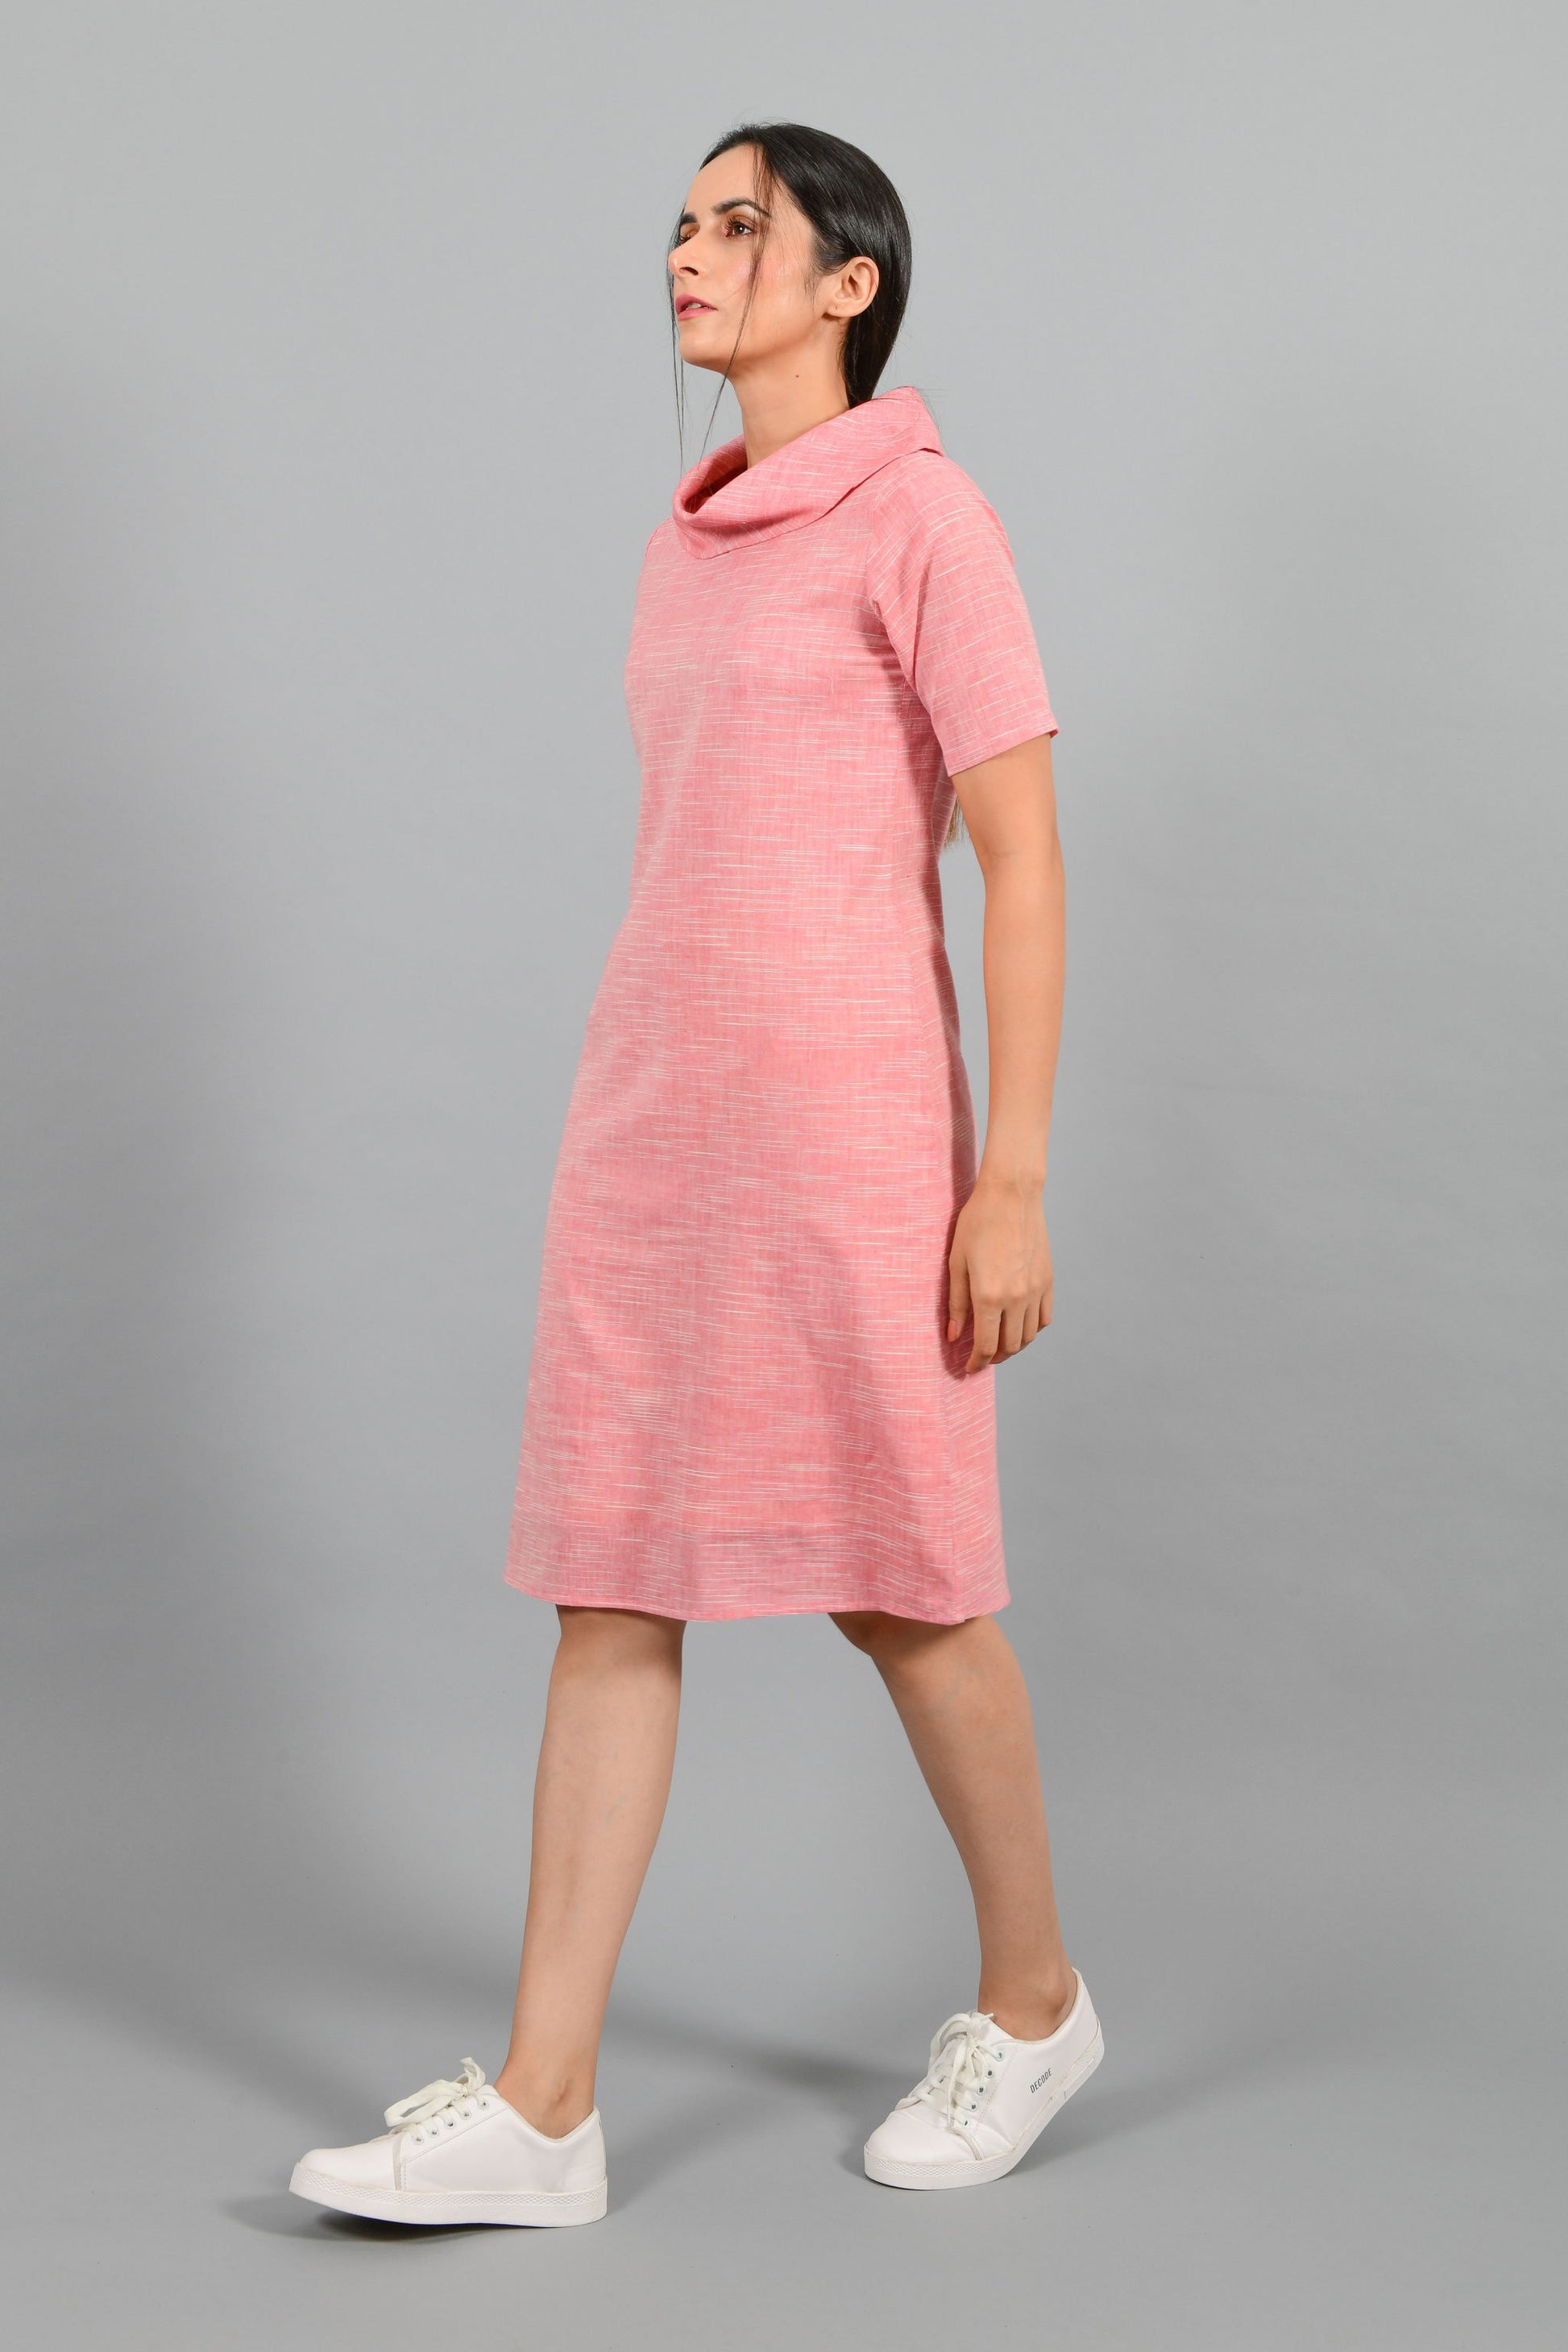 Side pose of an Indian female womenswear fashion model in a Pink and White space dyed cowl neck, elbow sleeve handspun and handwoven khadi cotton dress by Cotton Rack.